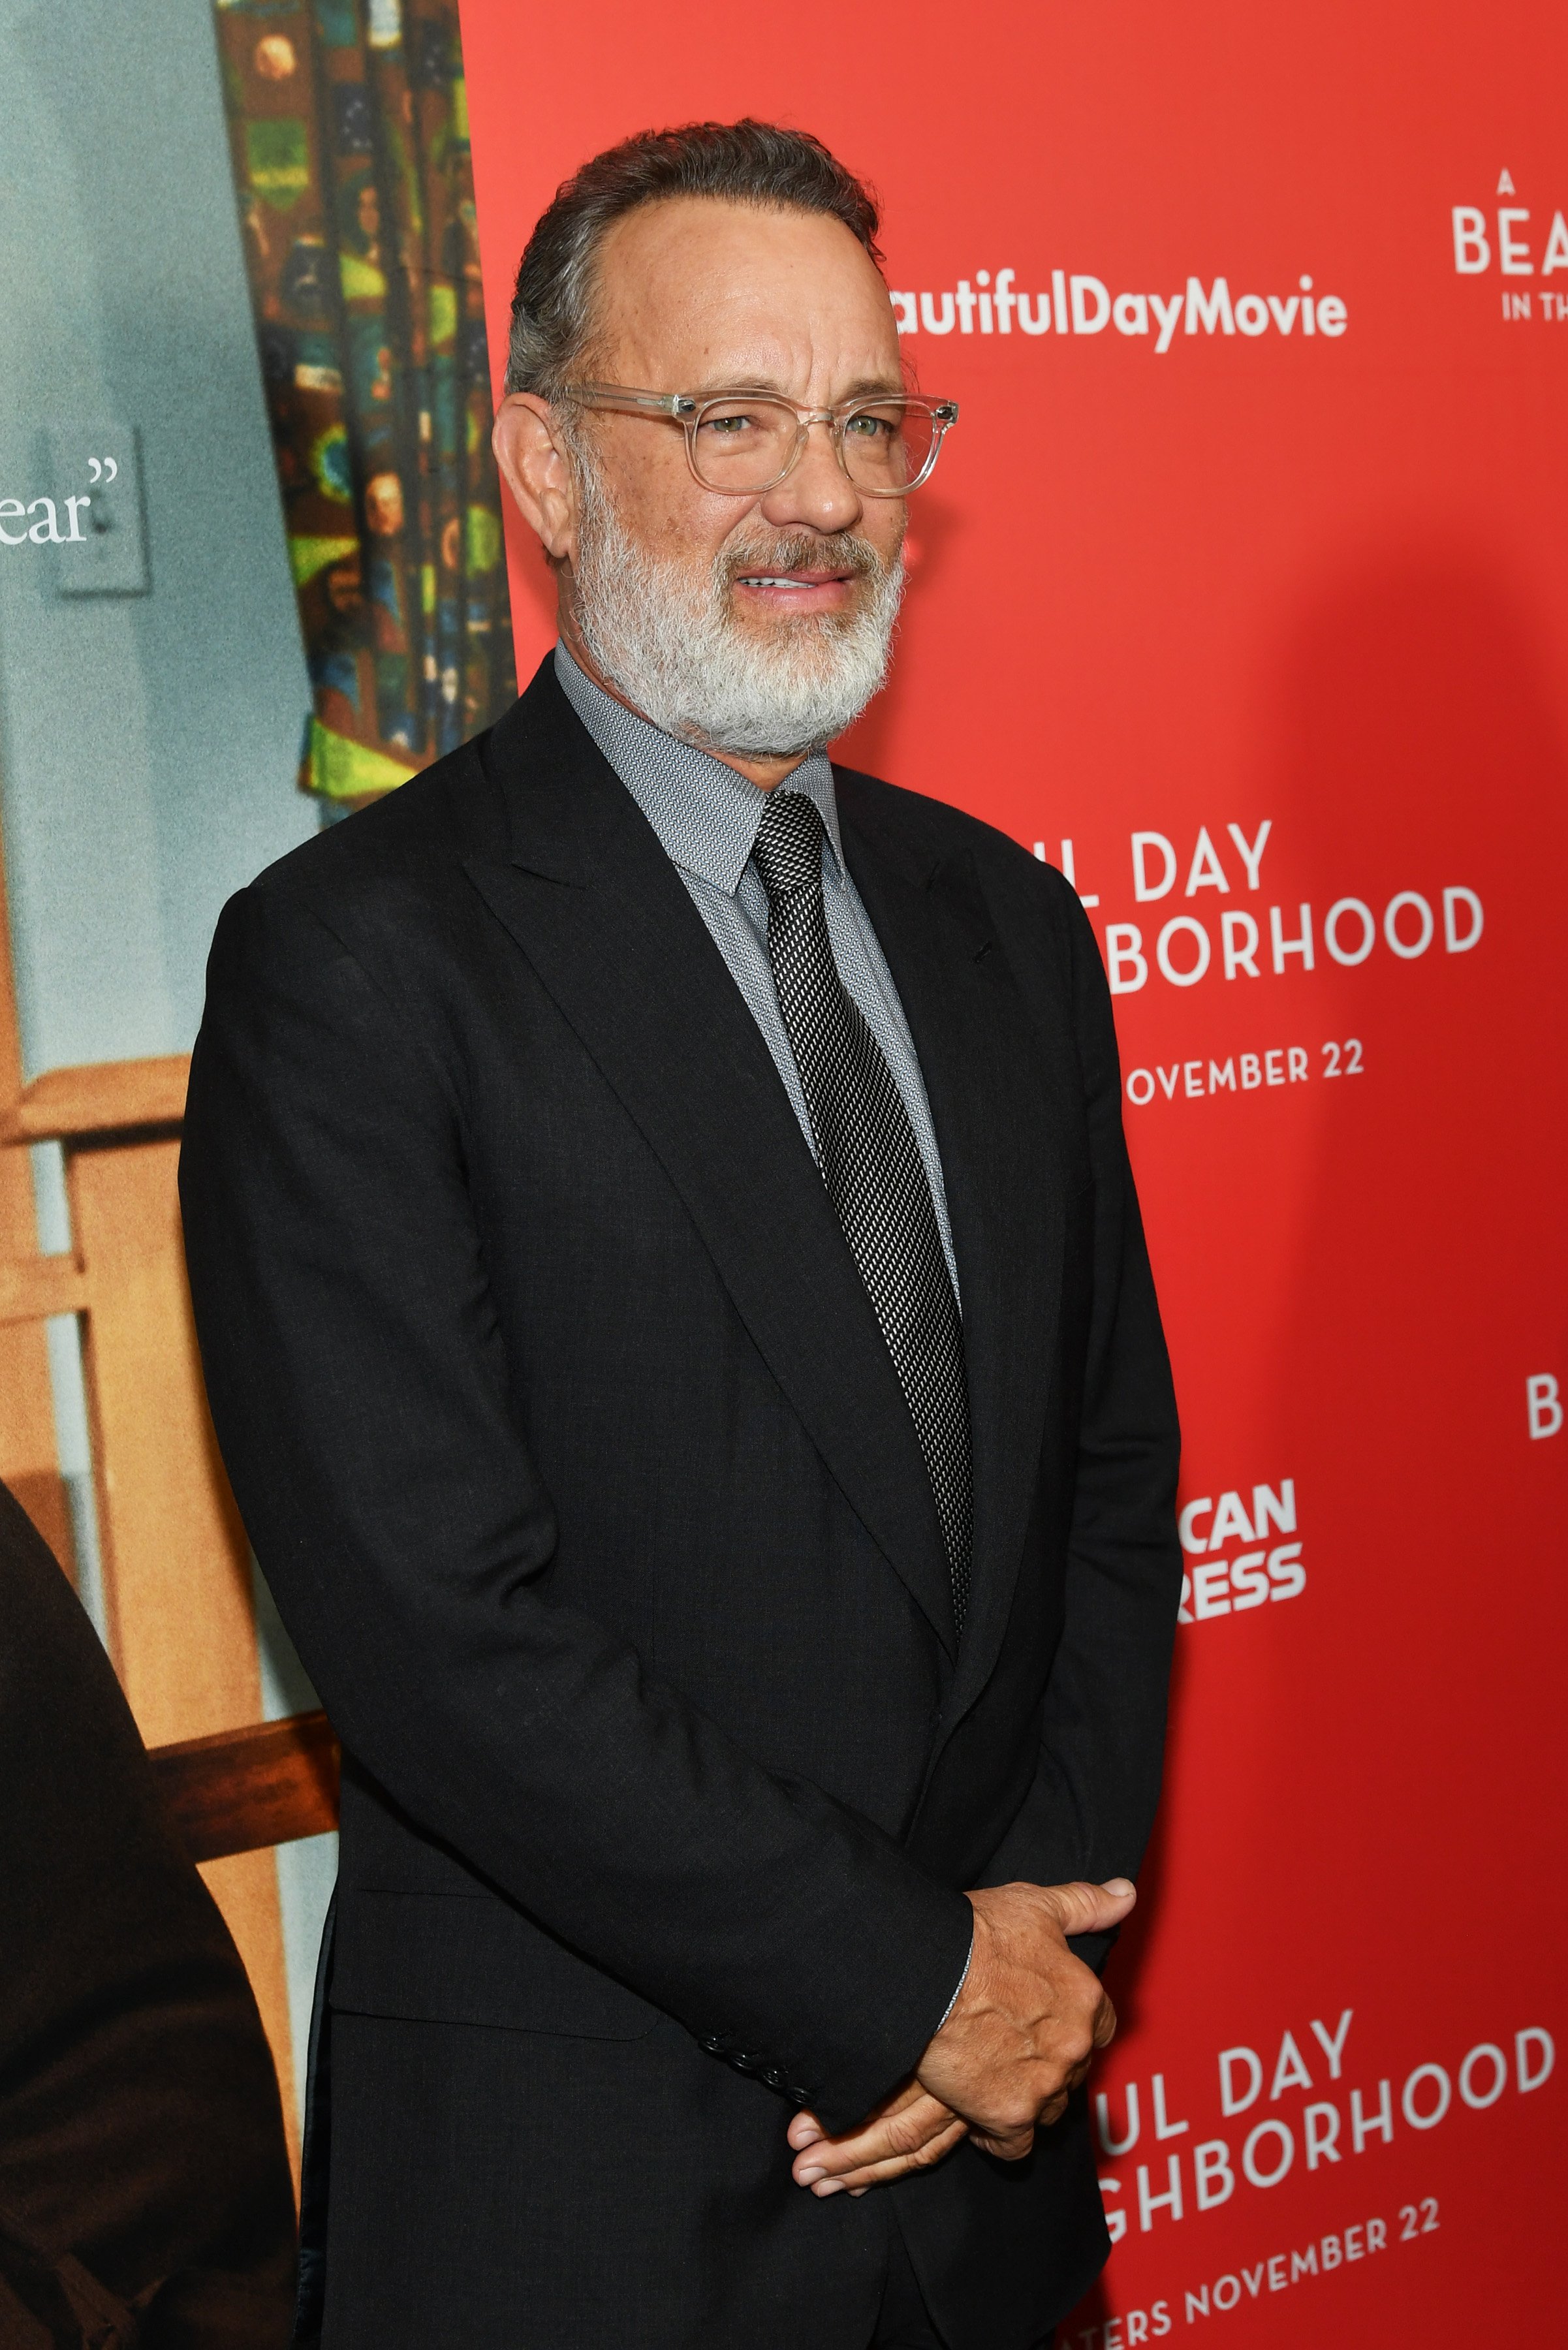 Tom Hanks attends "A Beautiful Day In The Neighborhood" New York Screening at Henry R. Luce Auditorium at Brookfield Place on November 17, 2019, in New York City. | Source: Getty Images.